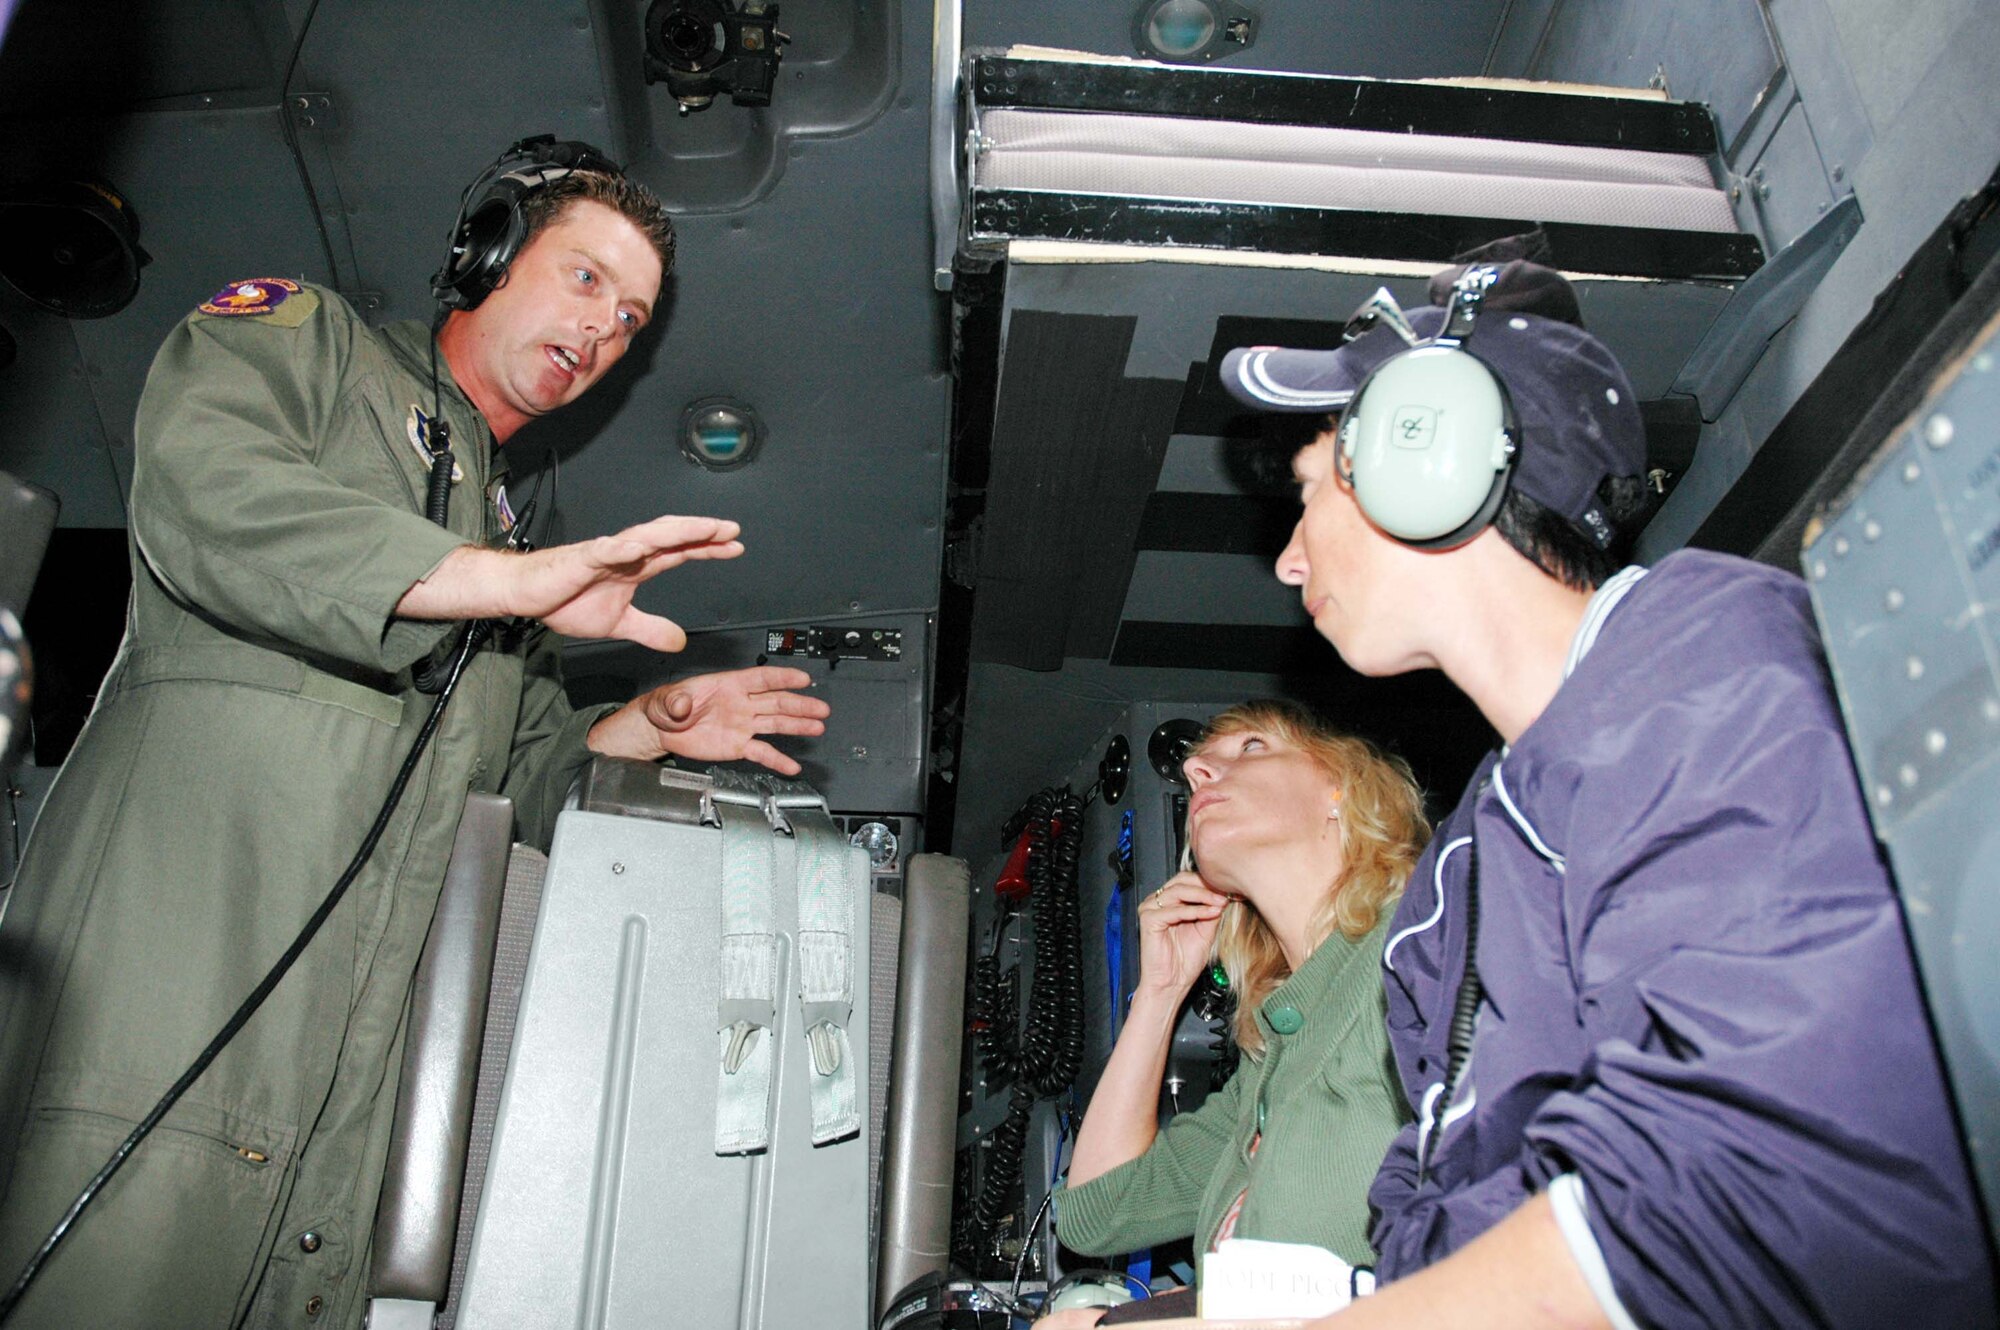 Capt. Mitchell Maes, 934th Operations Support Flight, explains headphone use to Tammy Hauer (right), wife of Robert Hauer, 27 APS, and Teresa Rettman, wife of Ben Rettman, 934 AMXS during a Spouse Flight on Sunday of the August UTA. (Air Force Photo/Tech. Sgt. Jeff Williams) 